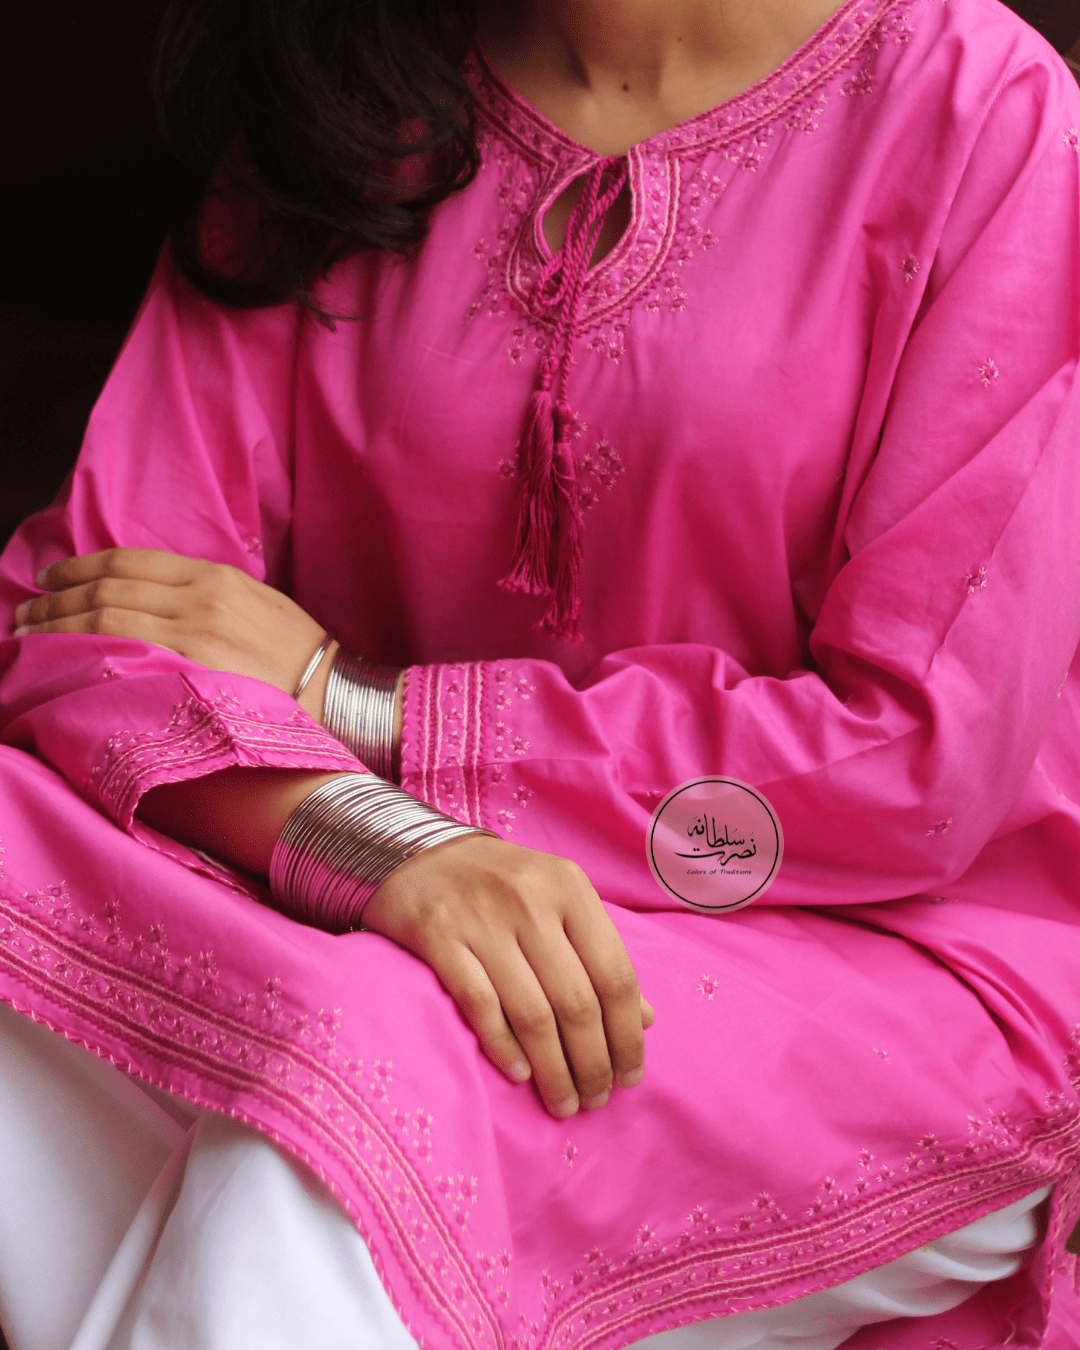 Hand Embroidered Pure Lawn Shirt - Fuchsia Shade - Pret